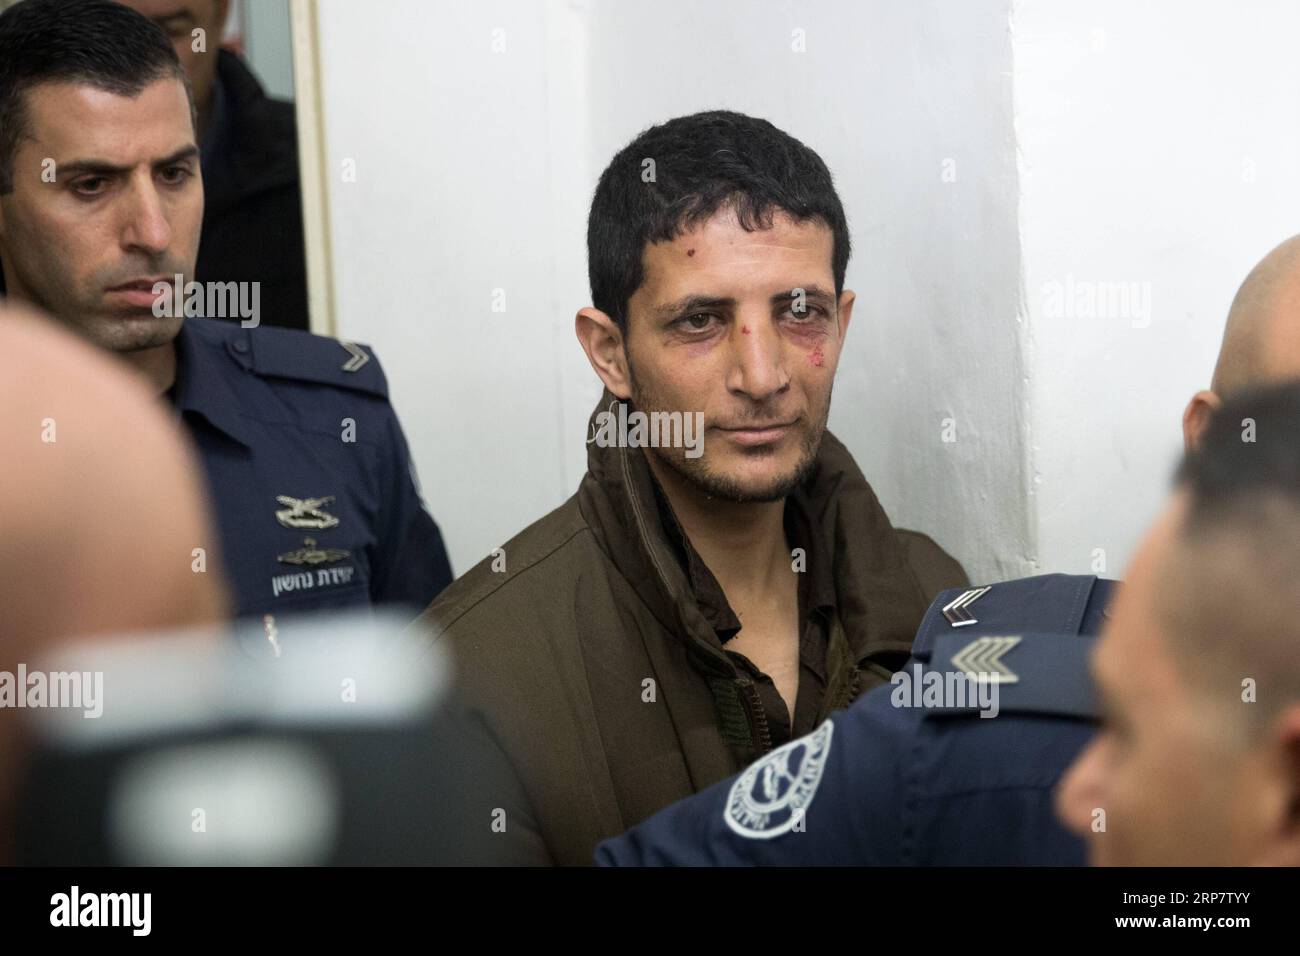 (190211) -- JERUSALEM, Feb. 11, 2019 -- Arafat Irfayia (C) appears at a courtroom in Jerusalem, on Feb. 11, 2019. Israel s Shin Bet security service said on Sunday that the killing of a young Israeli woman last week was a terrorist attack carried out by Arafat Irfayia. The Shin Bet said that the interrogation of Arafat Irfayia, arrested on Friday in the West Bank city of Ramallah, showed the killing was nationalistically-motivated. ) MIDEAST-JERUSALEM-KILLING-CHARGE JINI PUBLICATIONxNOTxINxCHN Stock Photo